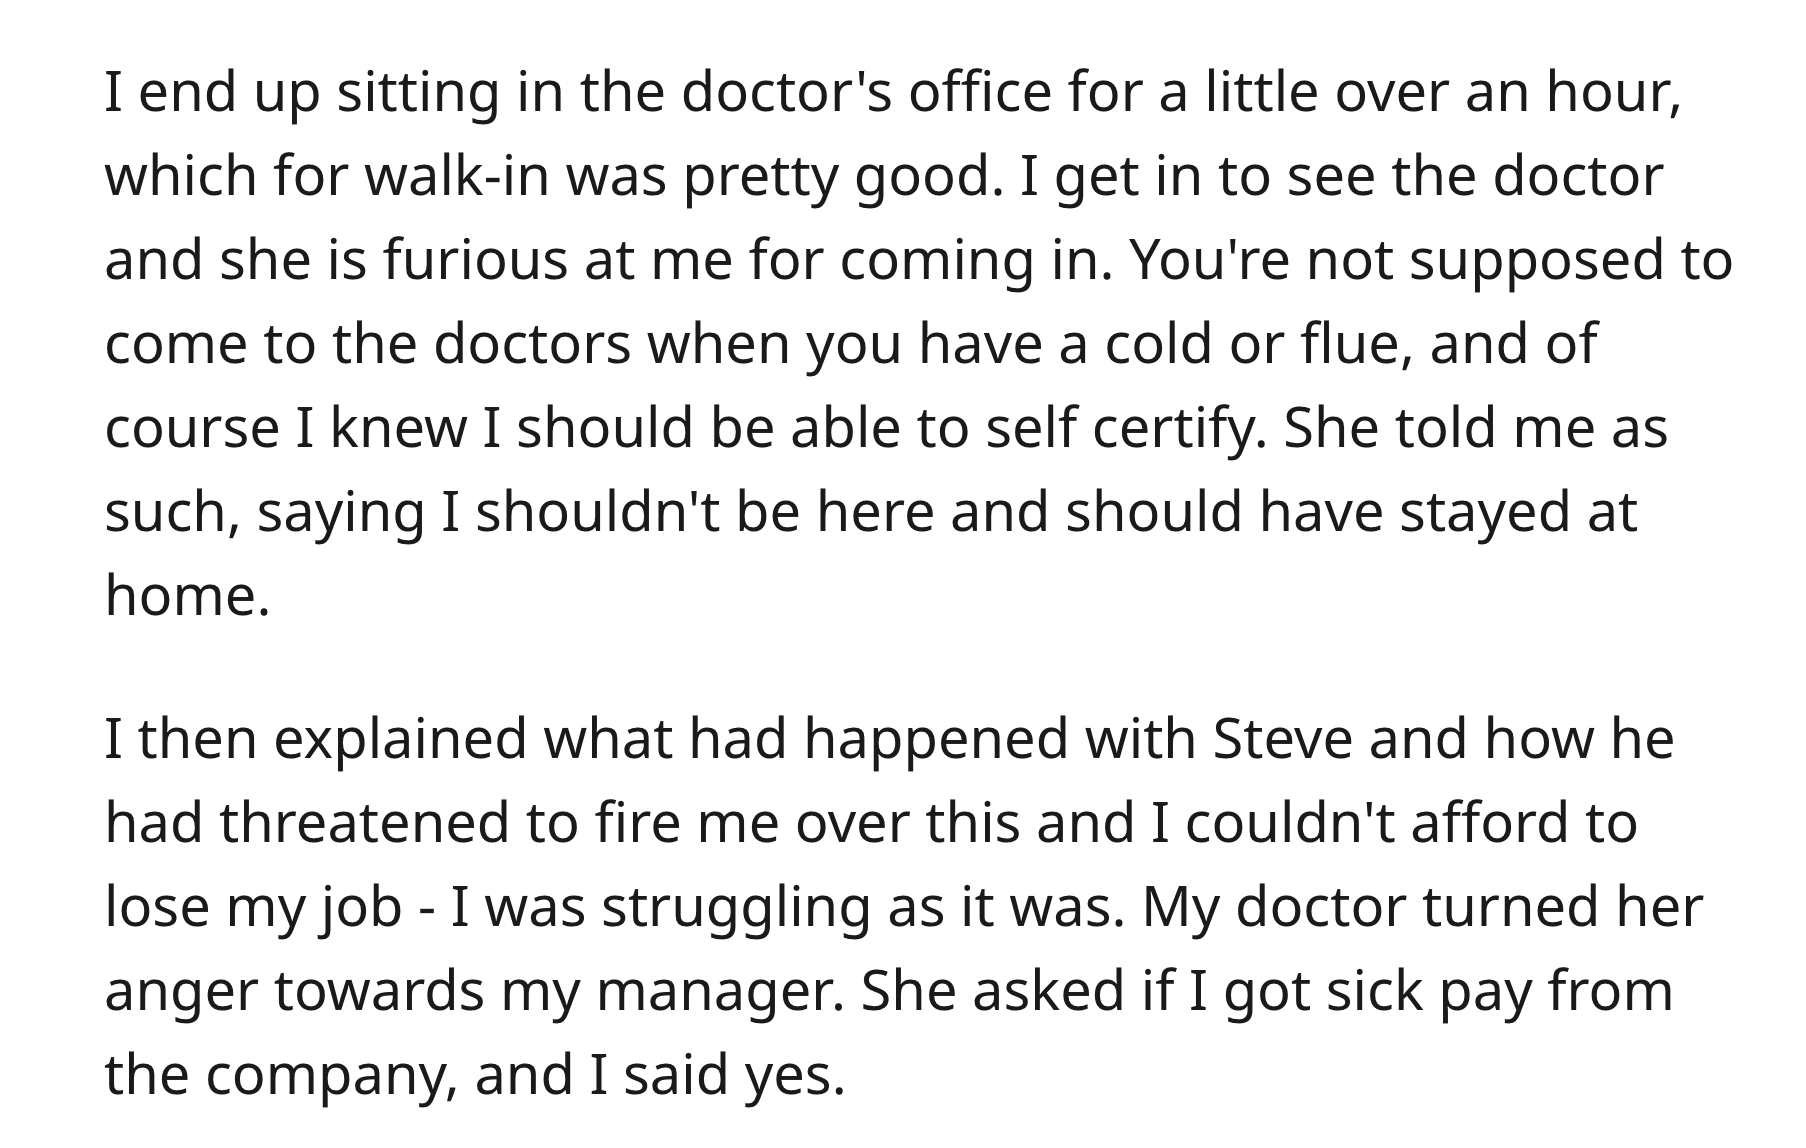 Boss Illegally Demands Doctor’s Note, So Doctor Recommends 2 Weeks Off - angle - I end up sitting in the doctor's office for a little over an hour, which for walkin was pretty good. I get in to see the doctor and she is furious at me for coming in. You're